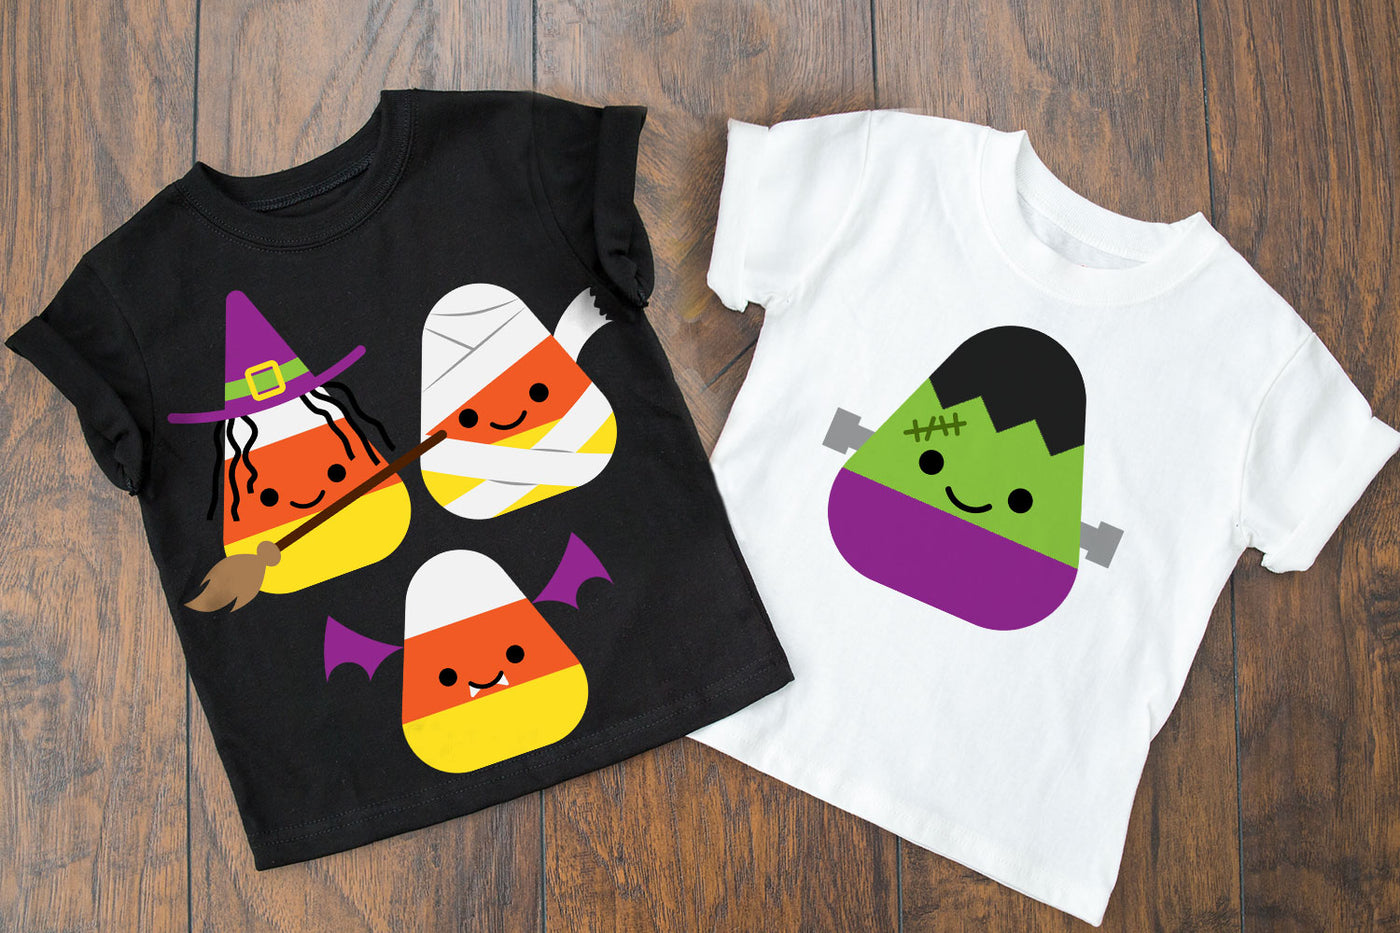 SVG design with 4 candy corns dressed up for Halloween as a witch, mummy, vampire bat, and Frankenstein's monster.